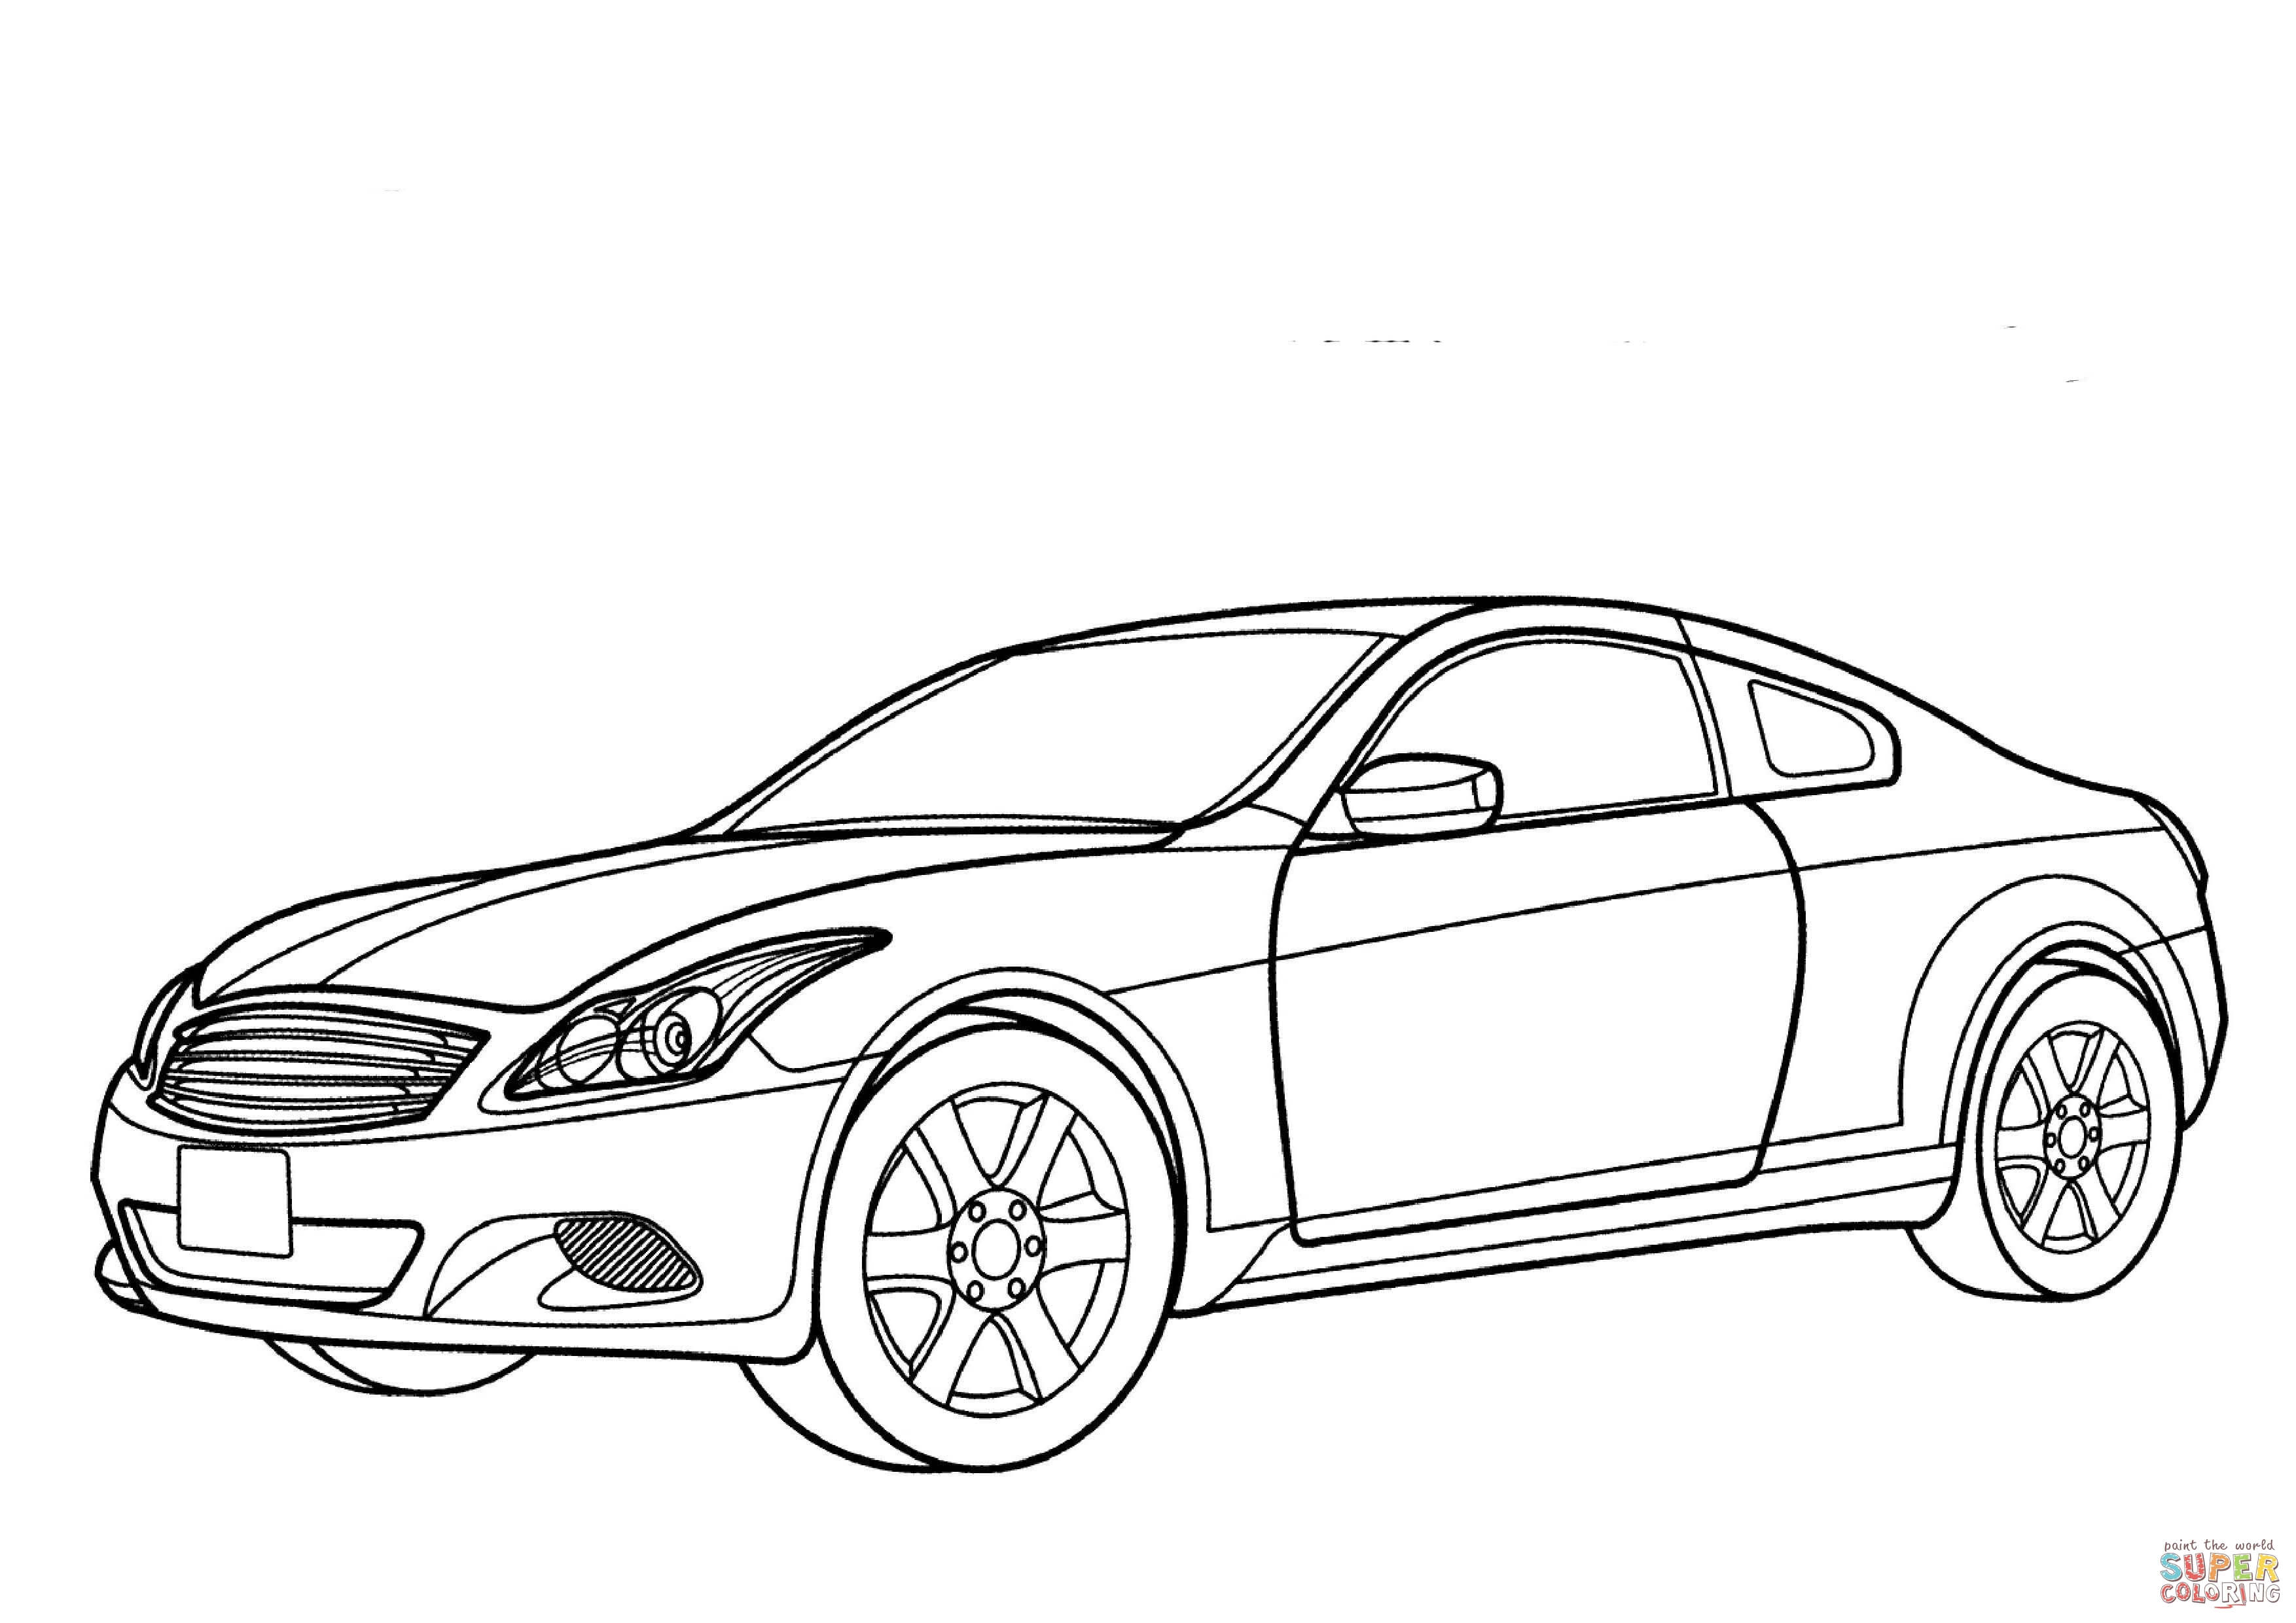 Skyline Coloring Pages Nissan Skyline Coloring Page Free Printable Coloring Pages